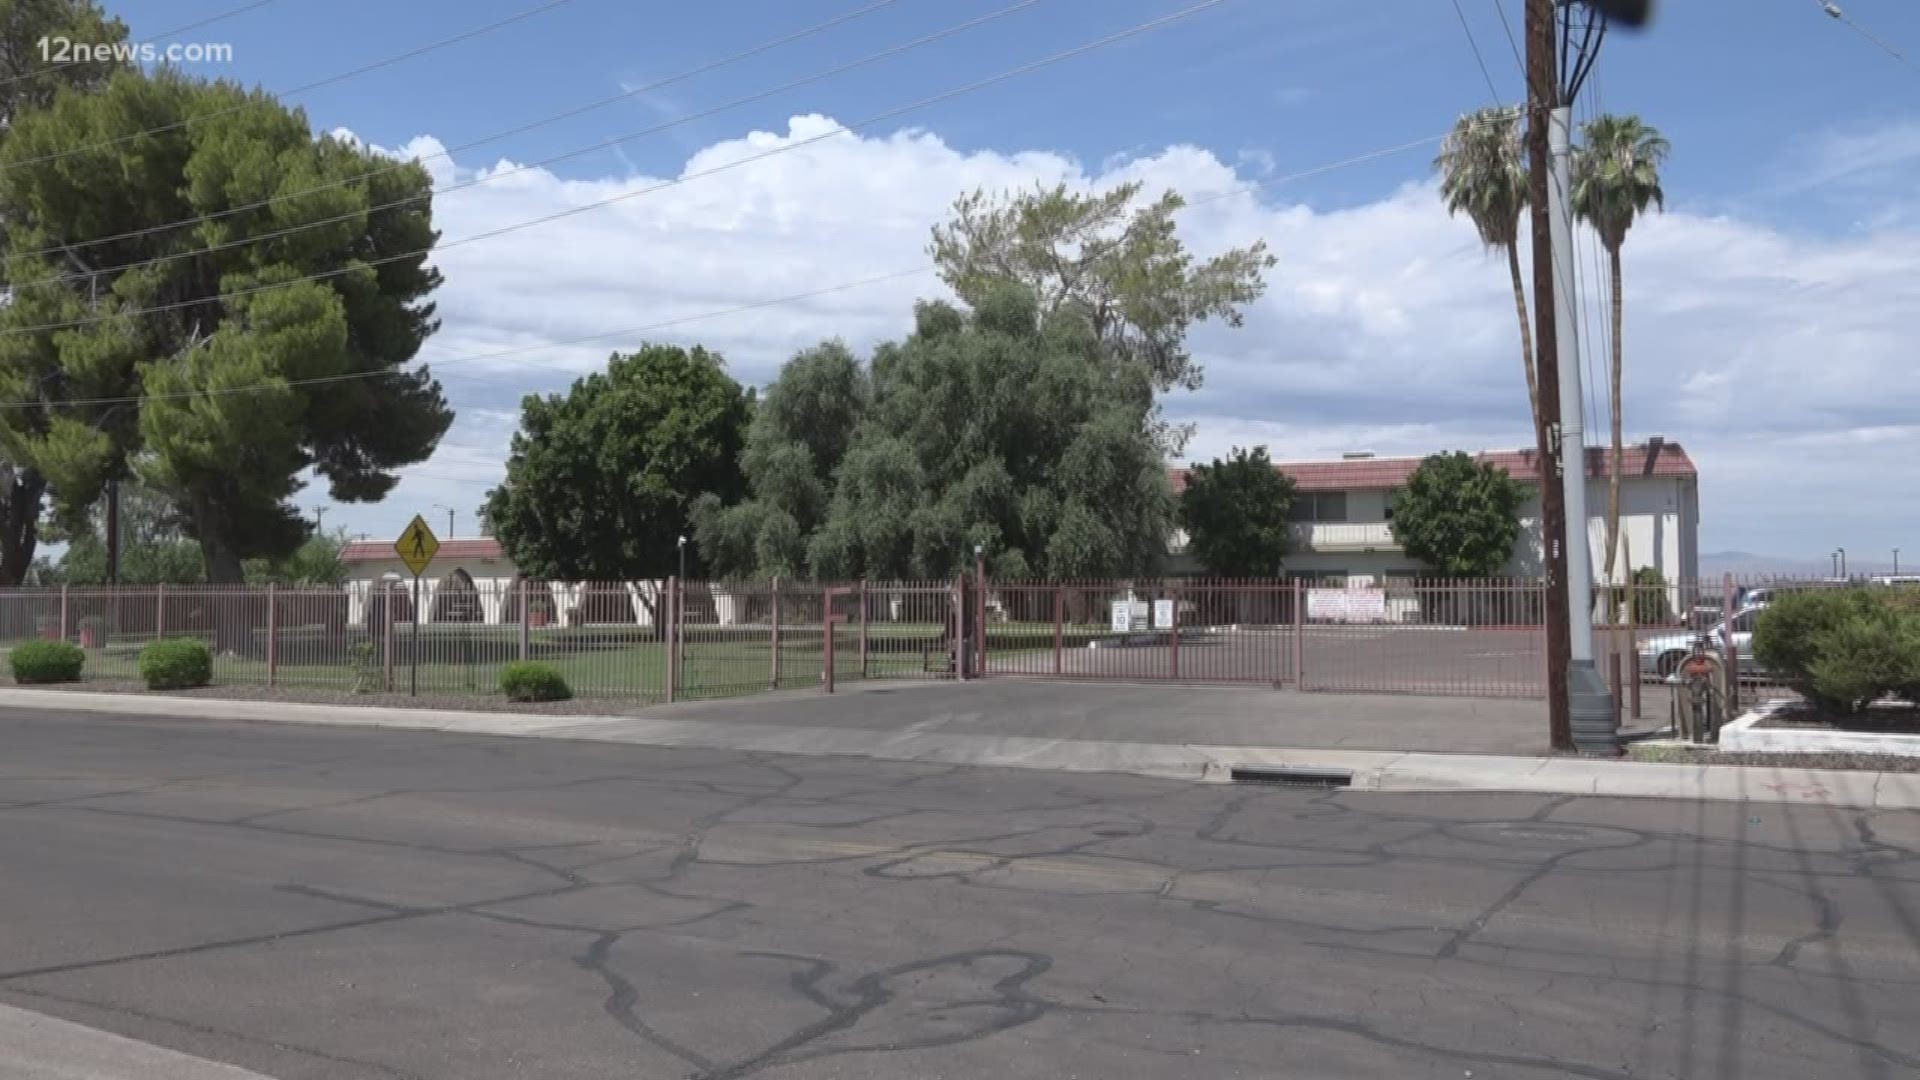 Southwest Key filed applications to reopen a downtown Phoenix facility that can house 420 children and one in the outer suburbs that can house 139. Colleen Sikora has the latest.